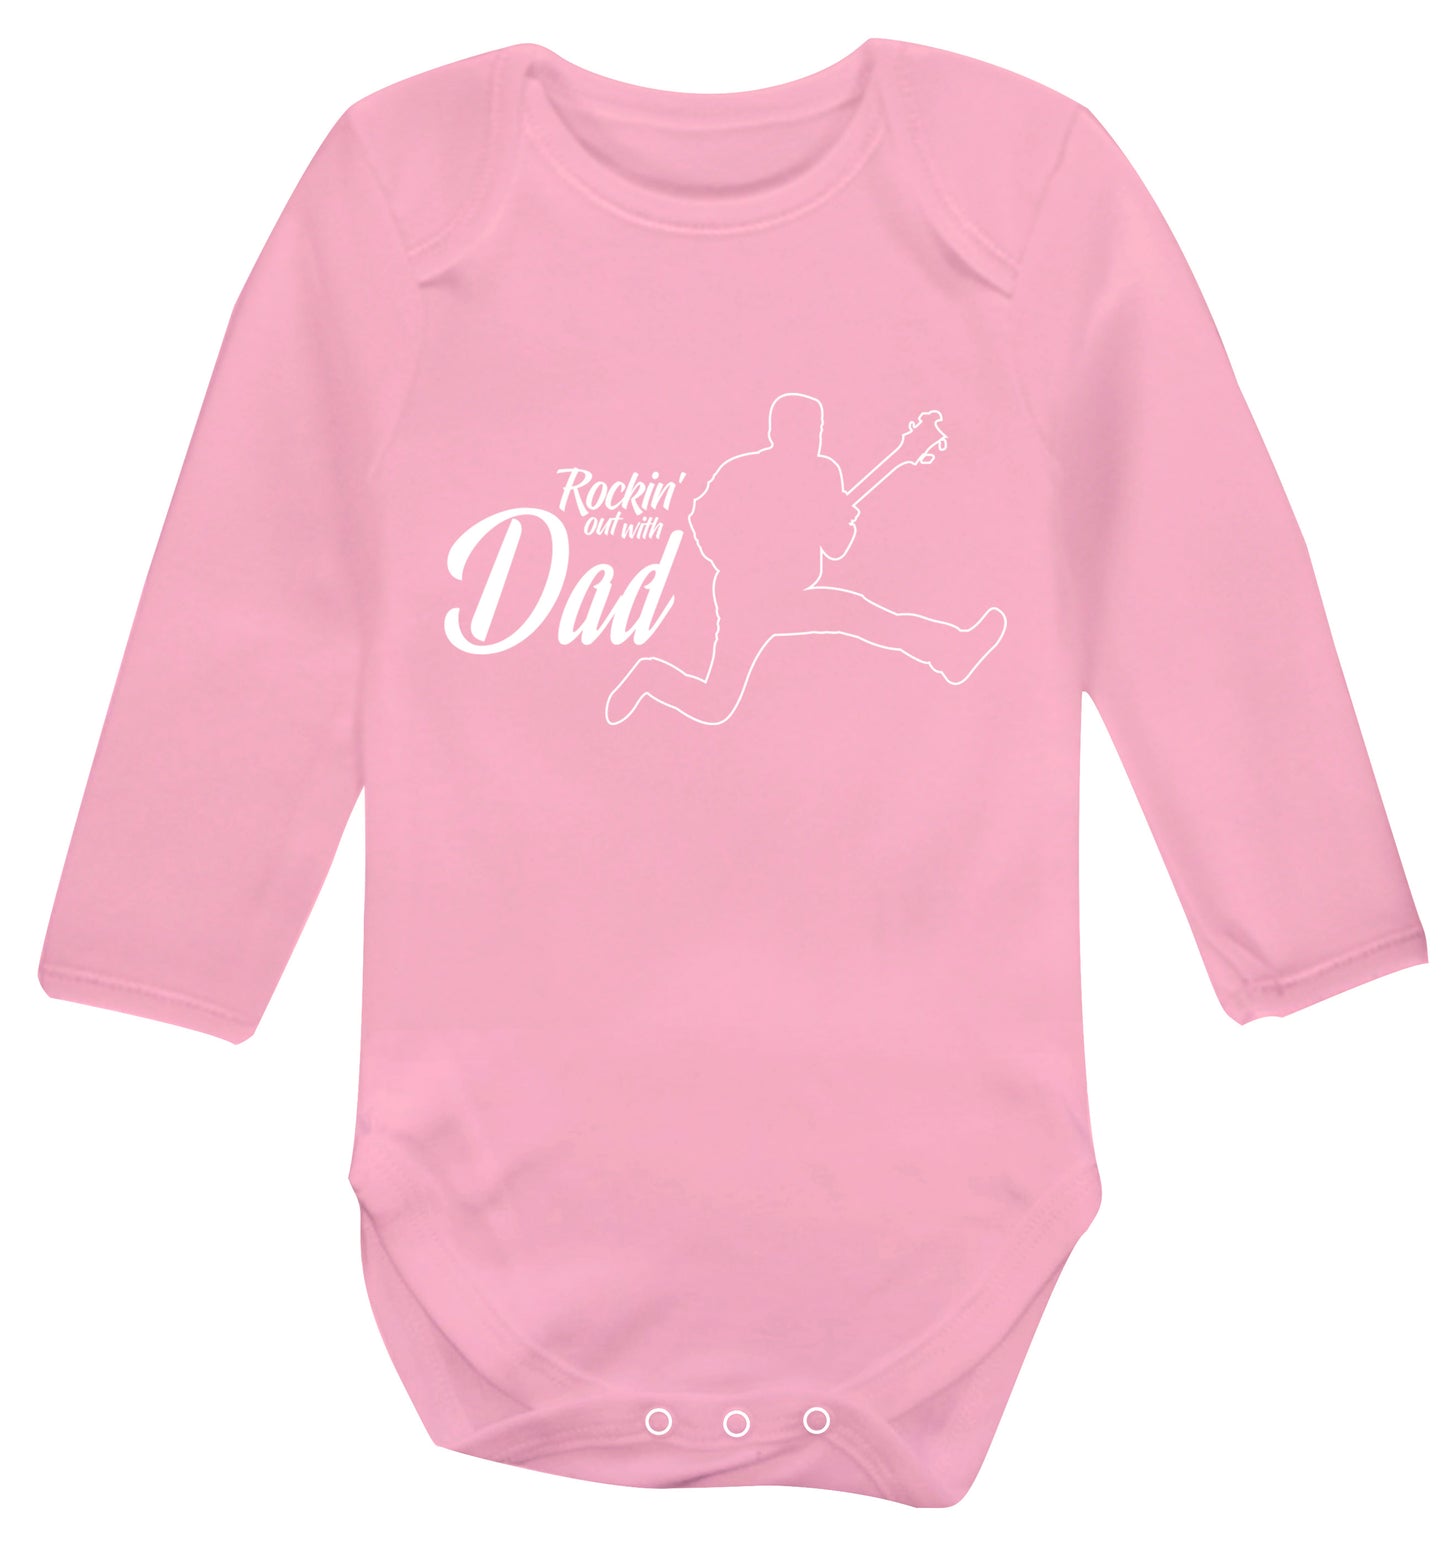 Rockin out with dad Baby Vest long sleeved pale pink 6-12 months